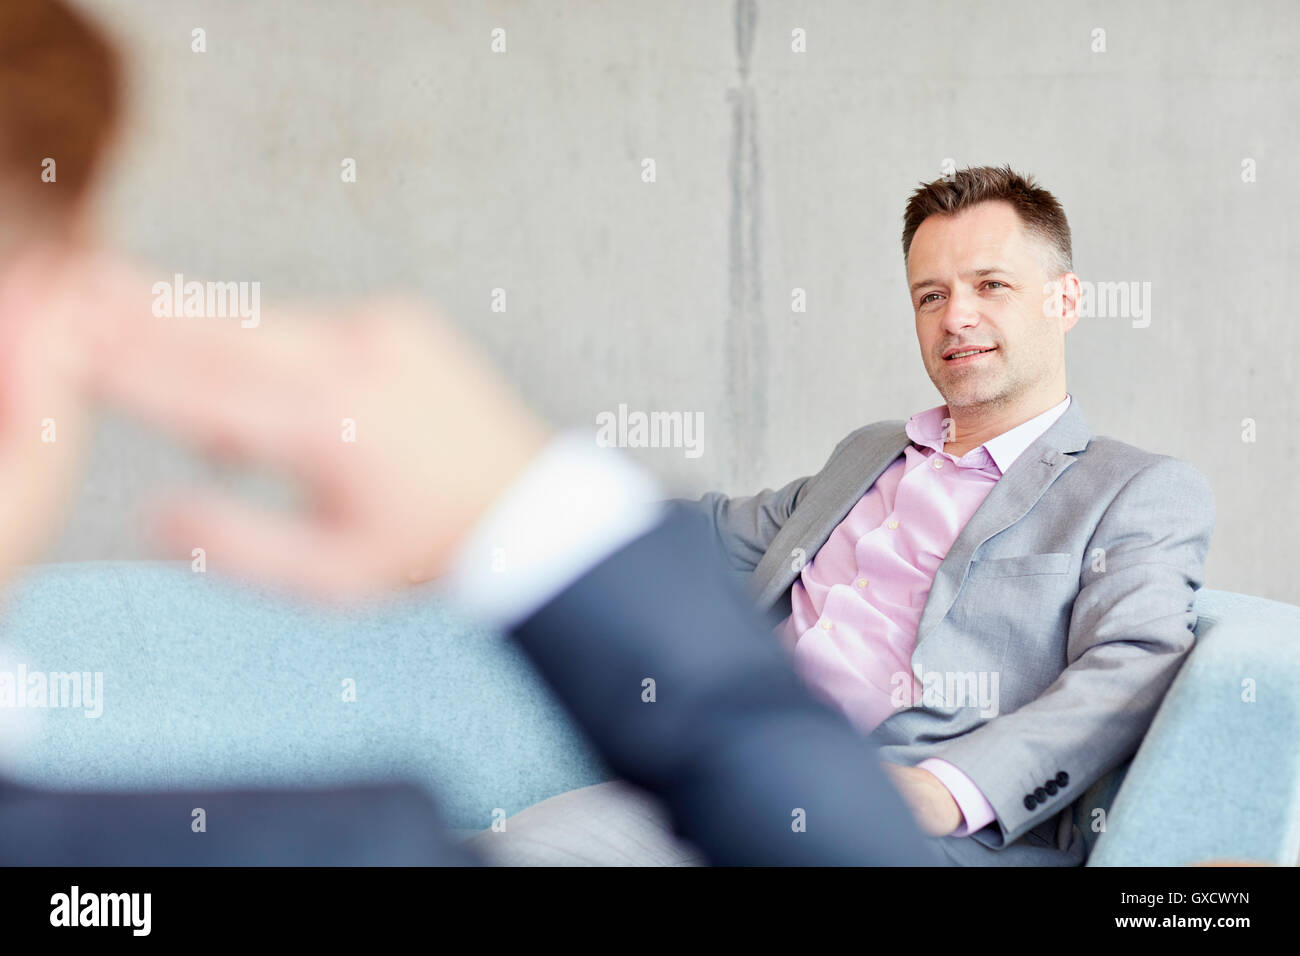 Two businessmen meeting in office Stock Photo